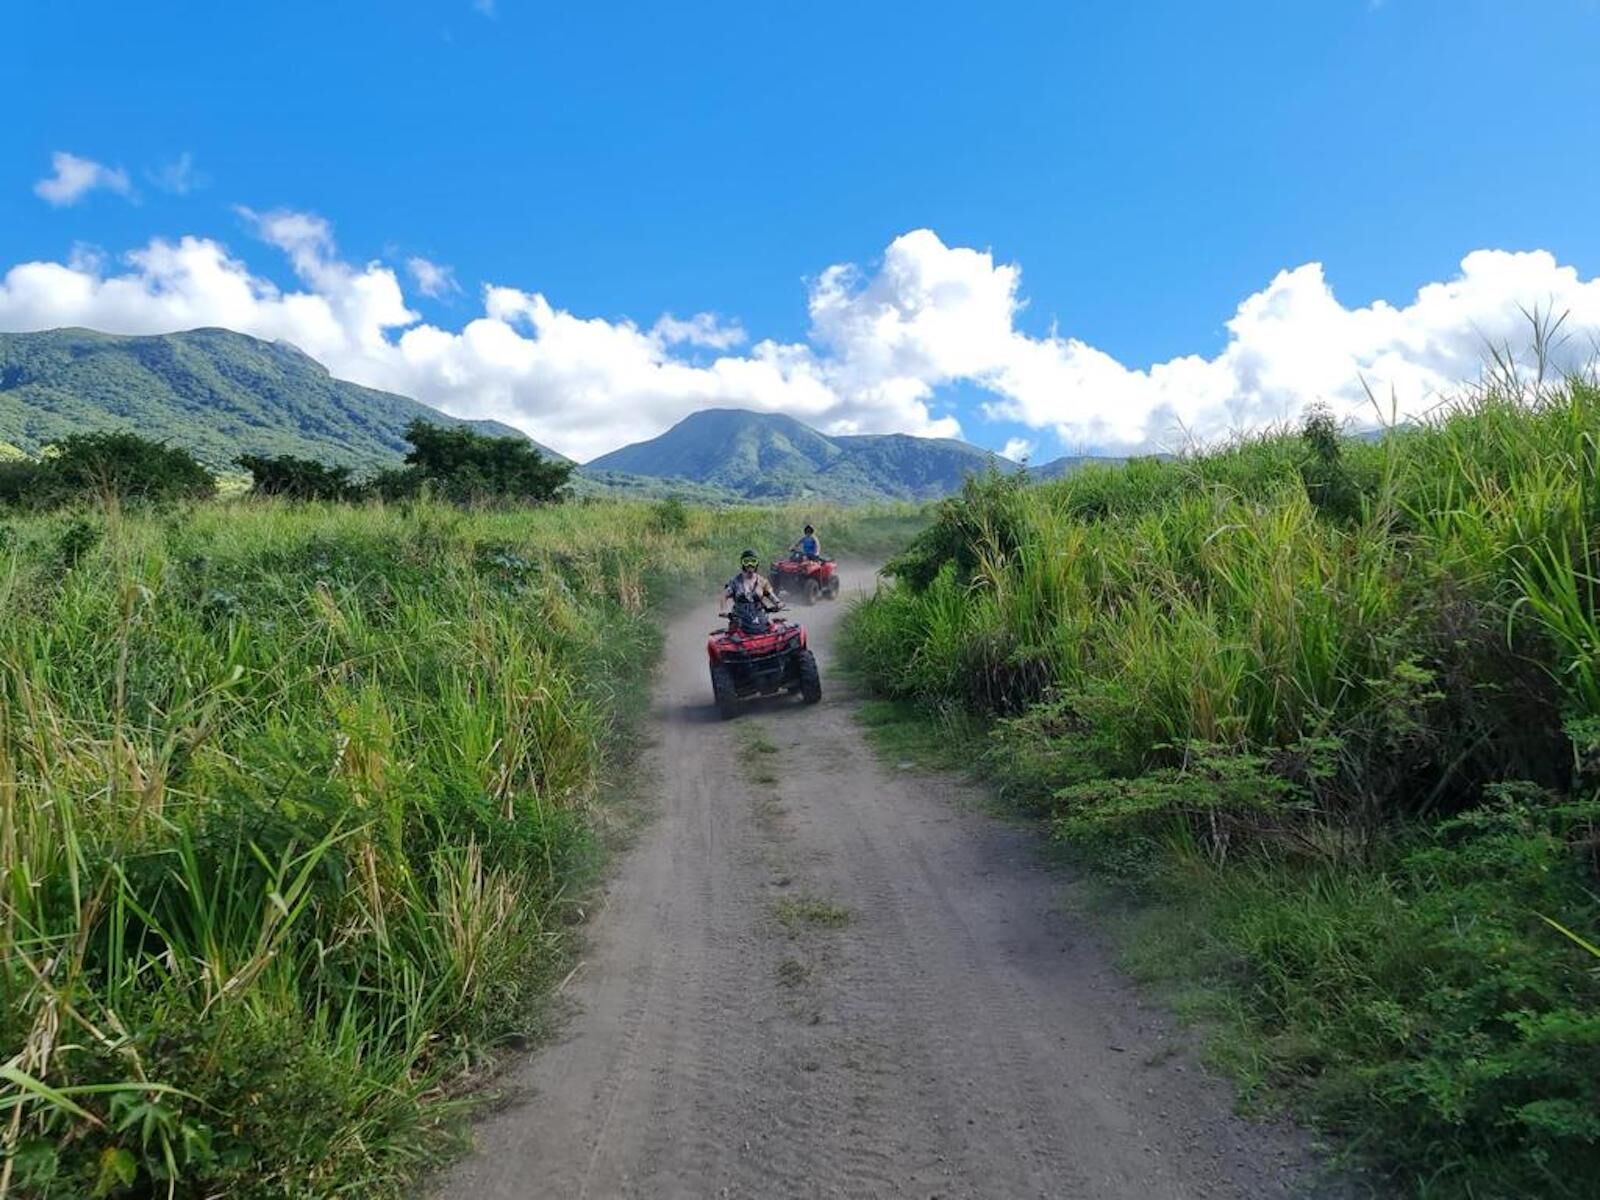 Things to do in St. Kitts